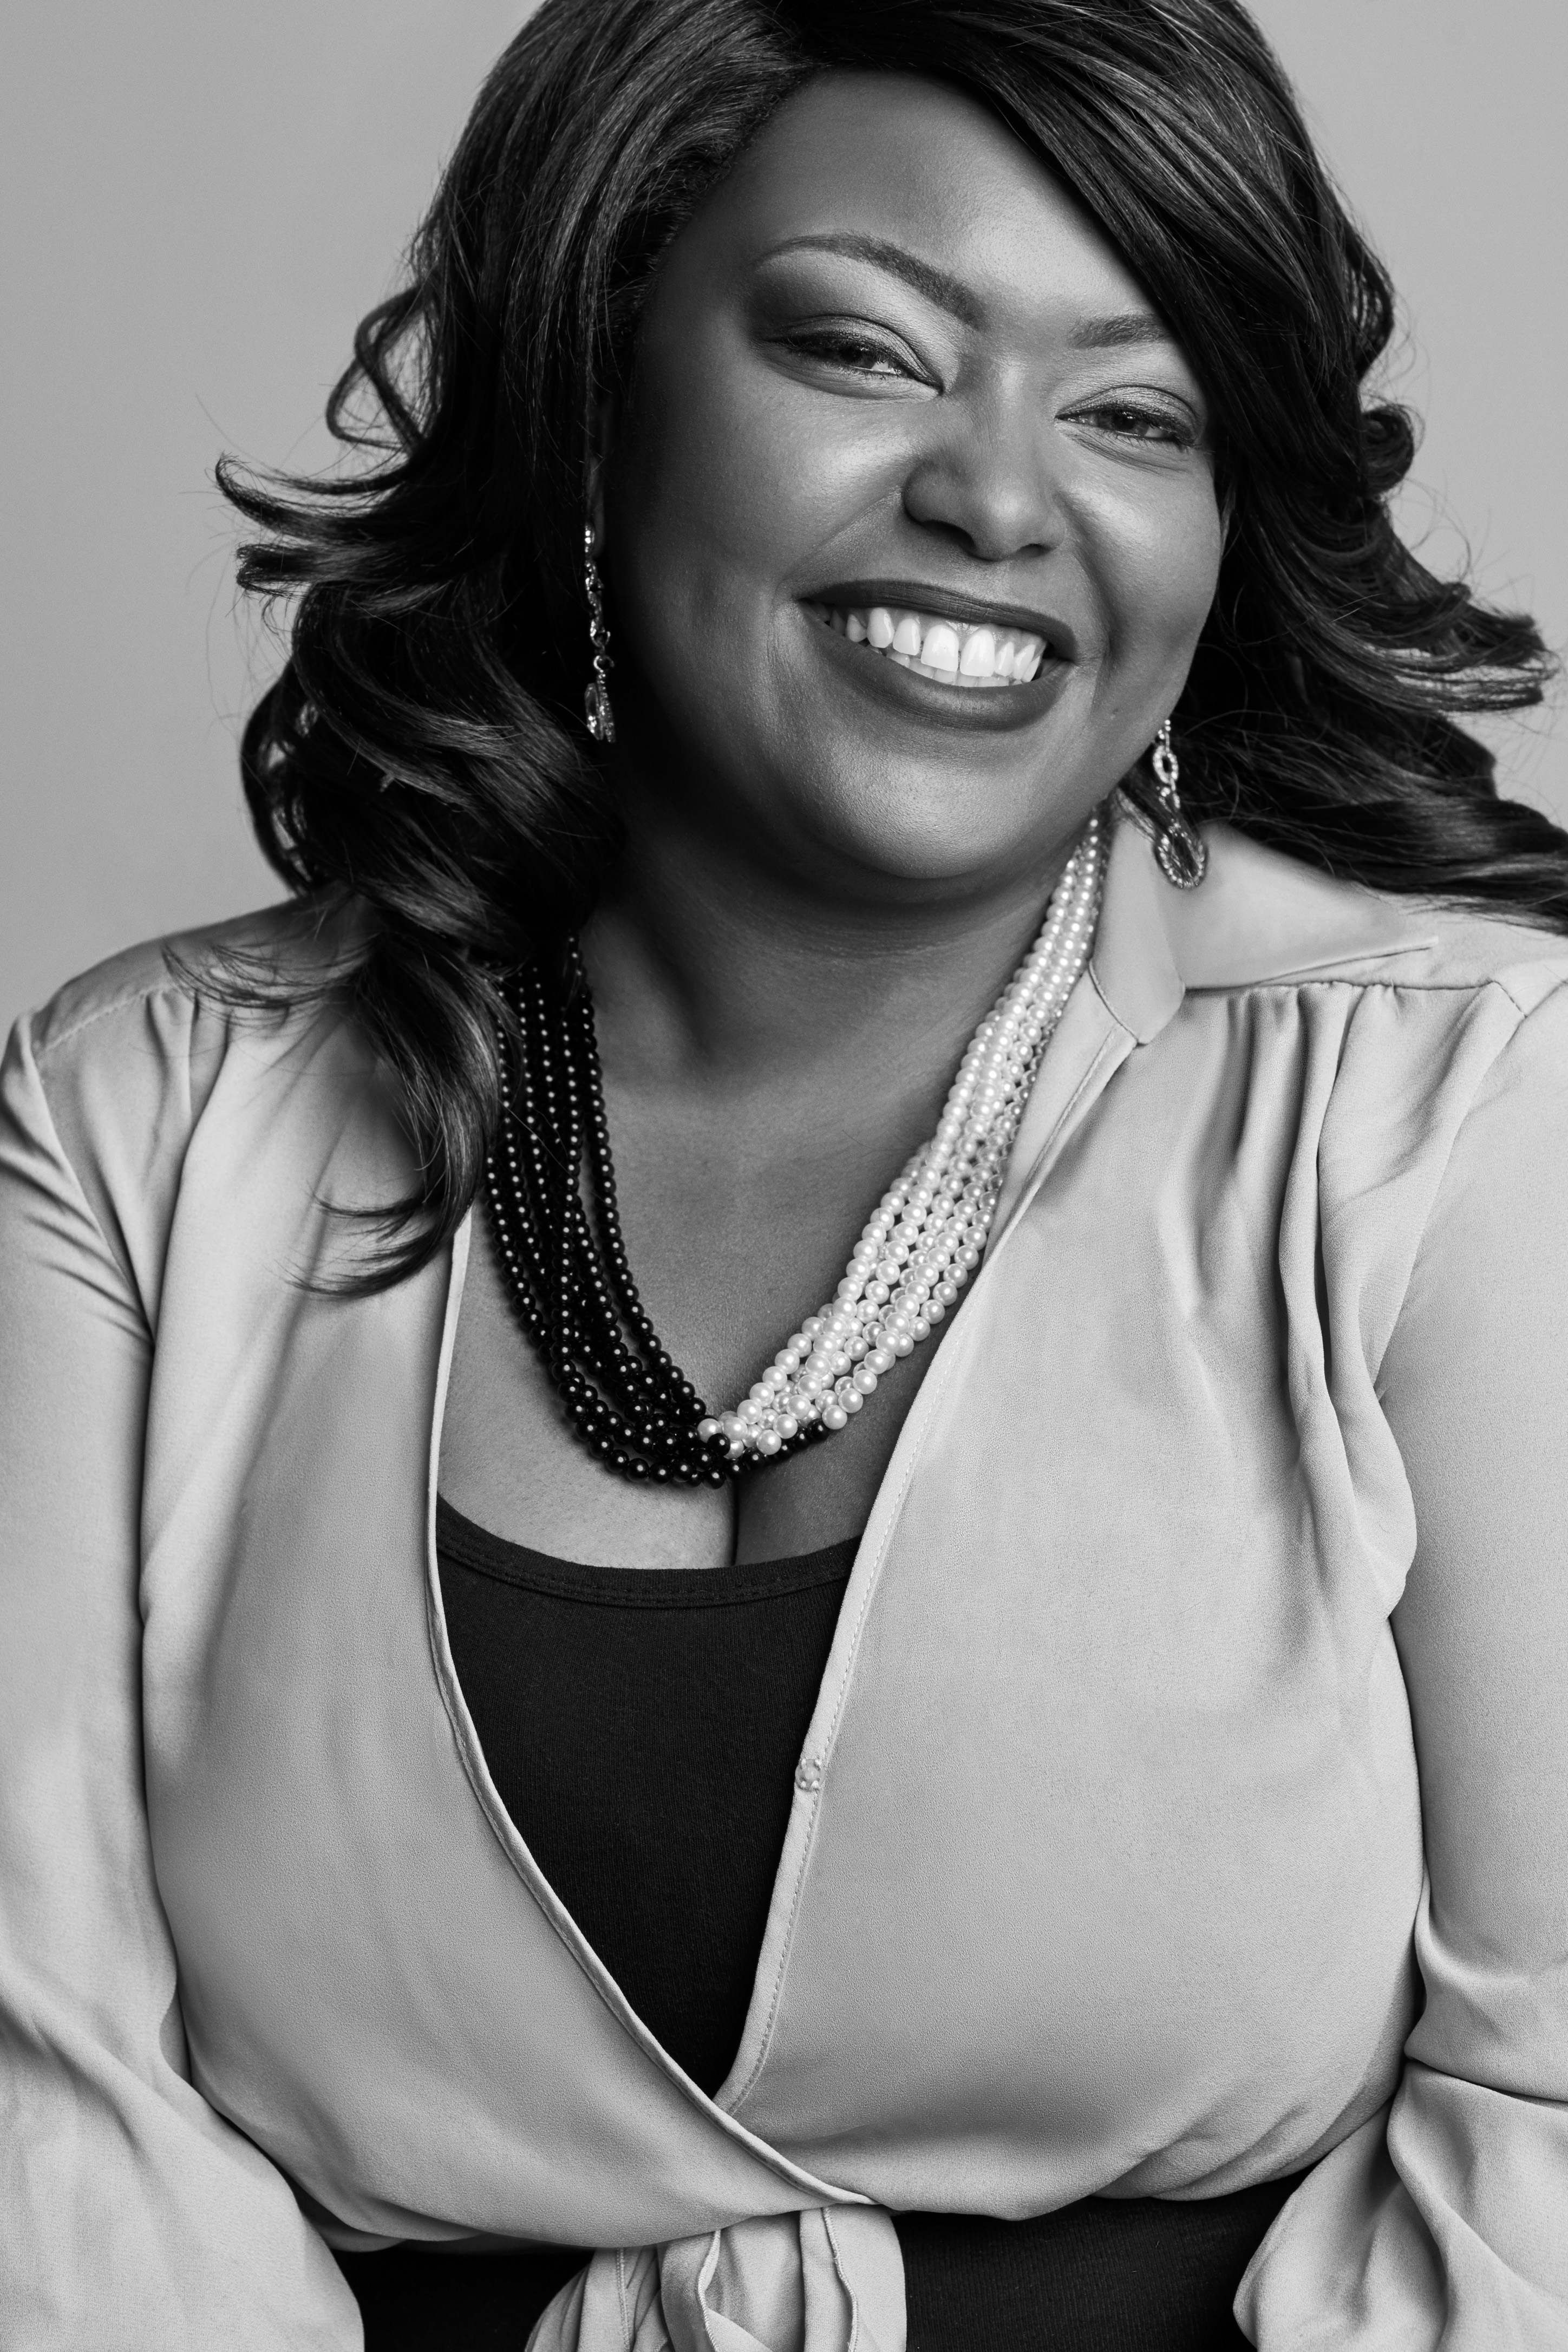 Shannon, David's Bridal's Manager of CRM Operations & Technology (African American woman in light colored silk blouse and black and white beaded necklace)